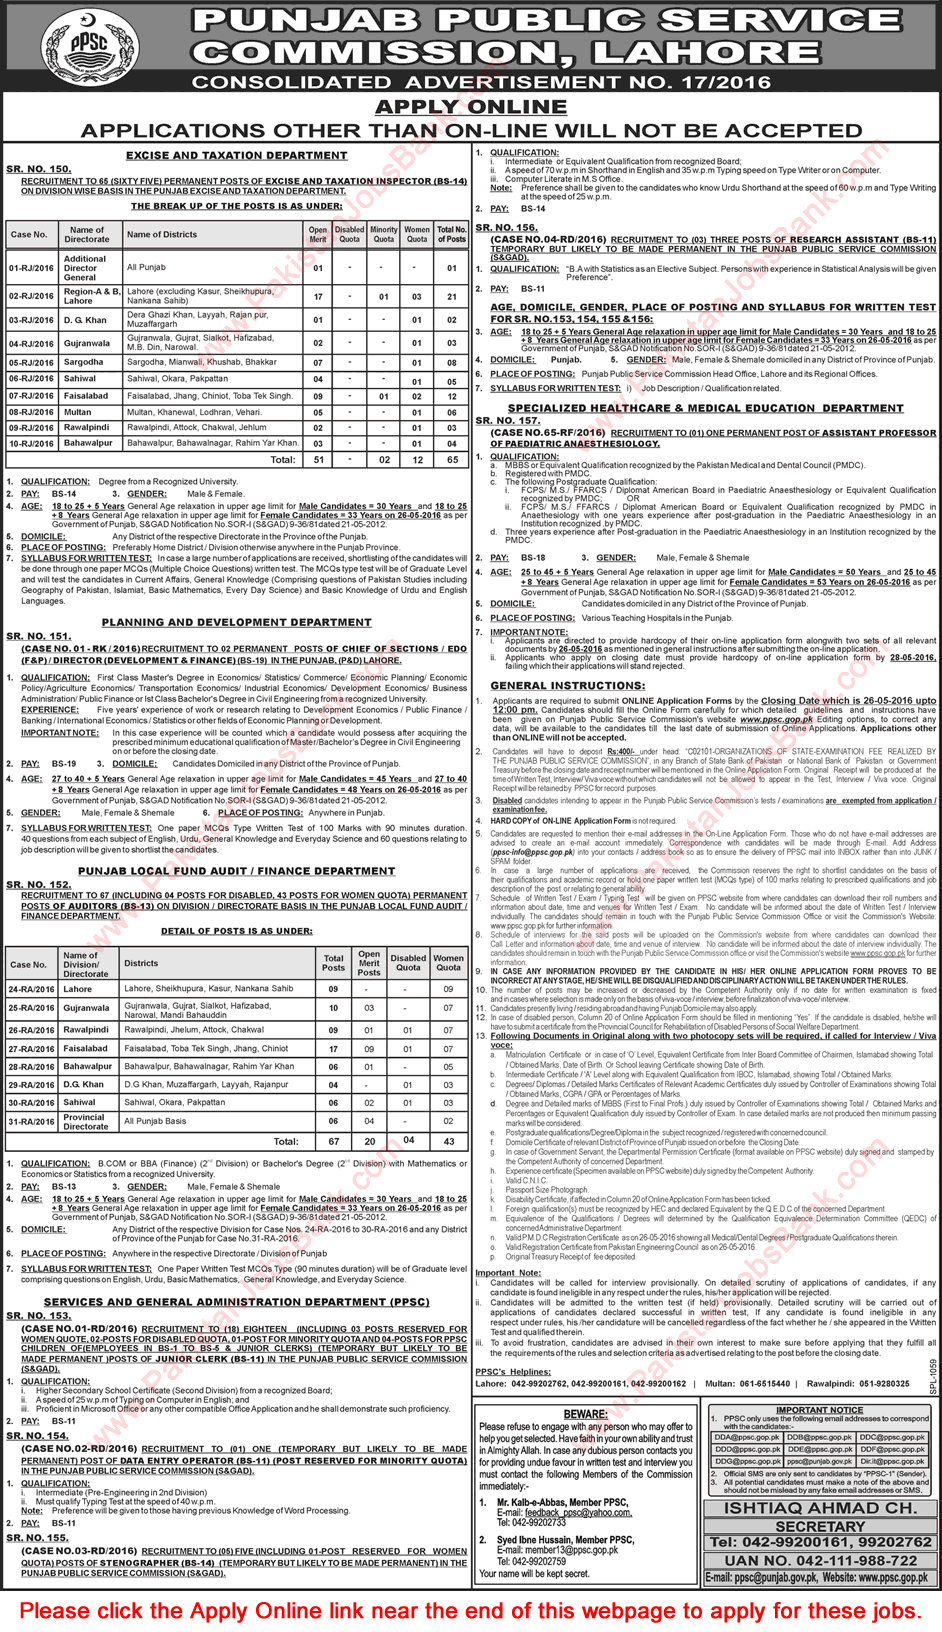 PPSC Jobs May 2016 Consolidated Advertisement No 17/2016 Apply Online Latest